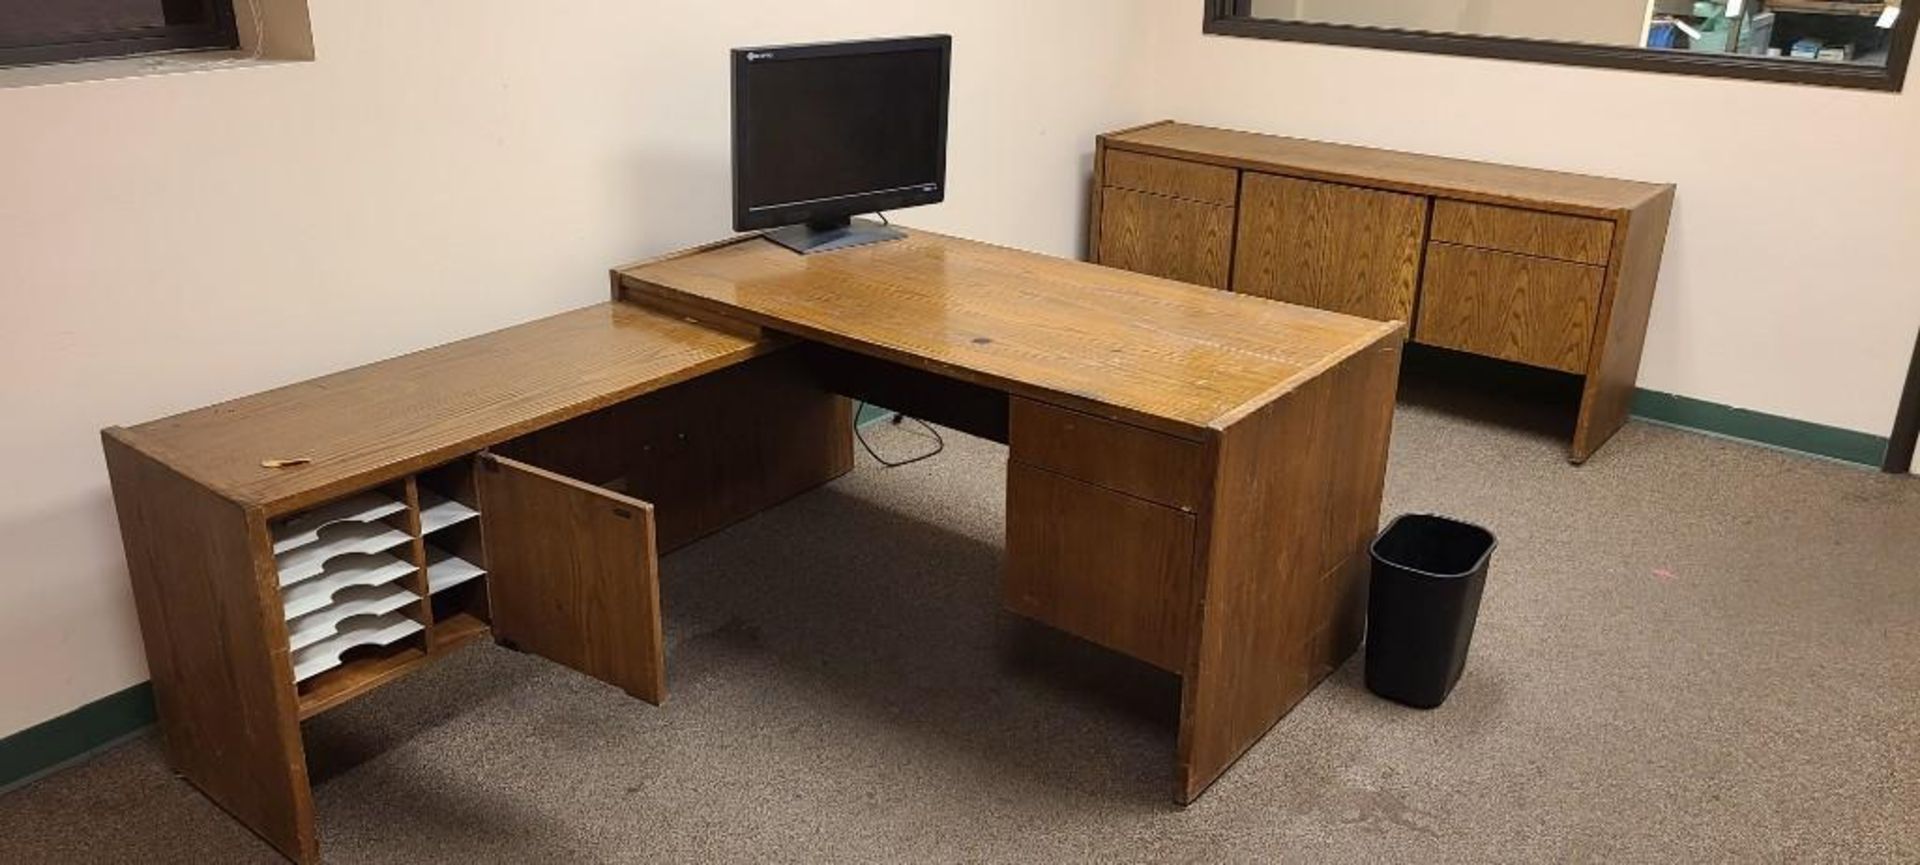 WOOD CORNER DESK 6'X5'X30", OFFICE TABLE WITH HANGING FILE DRAWERS, SOYO MONITOR